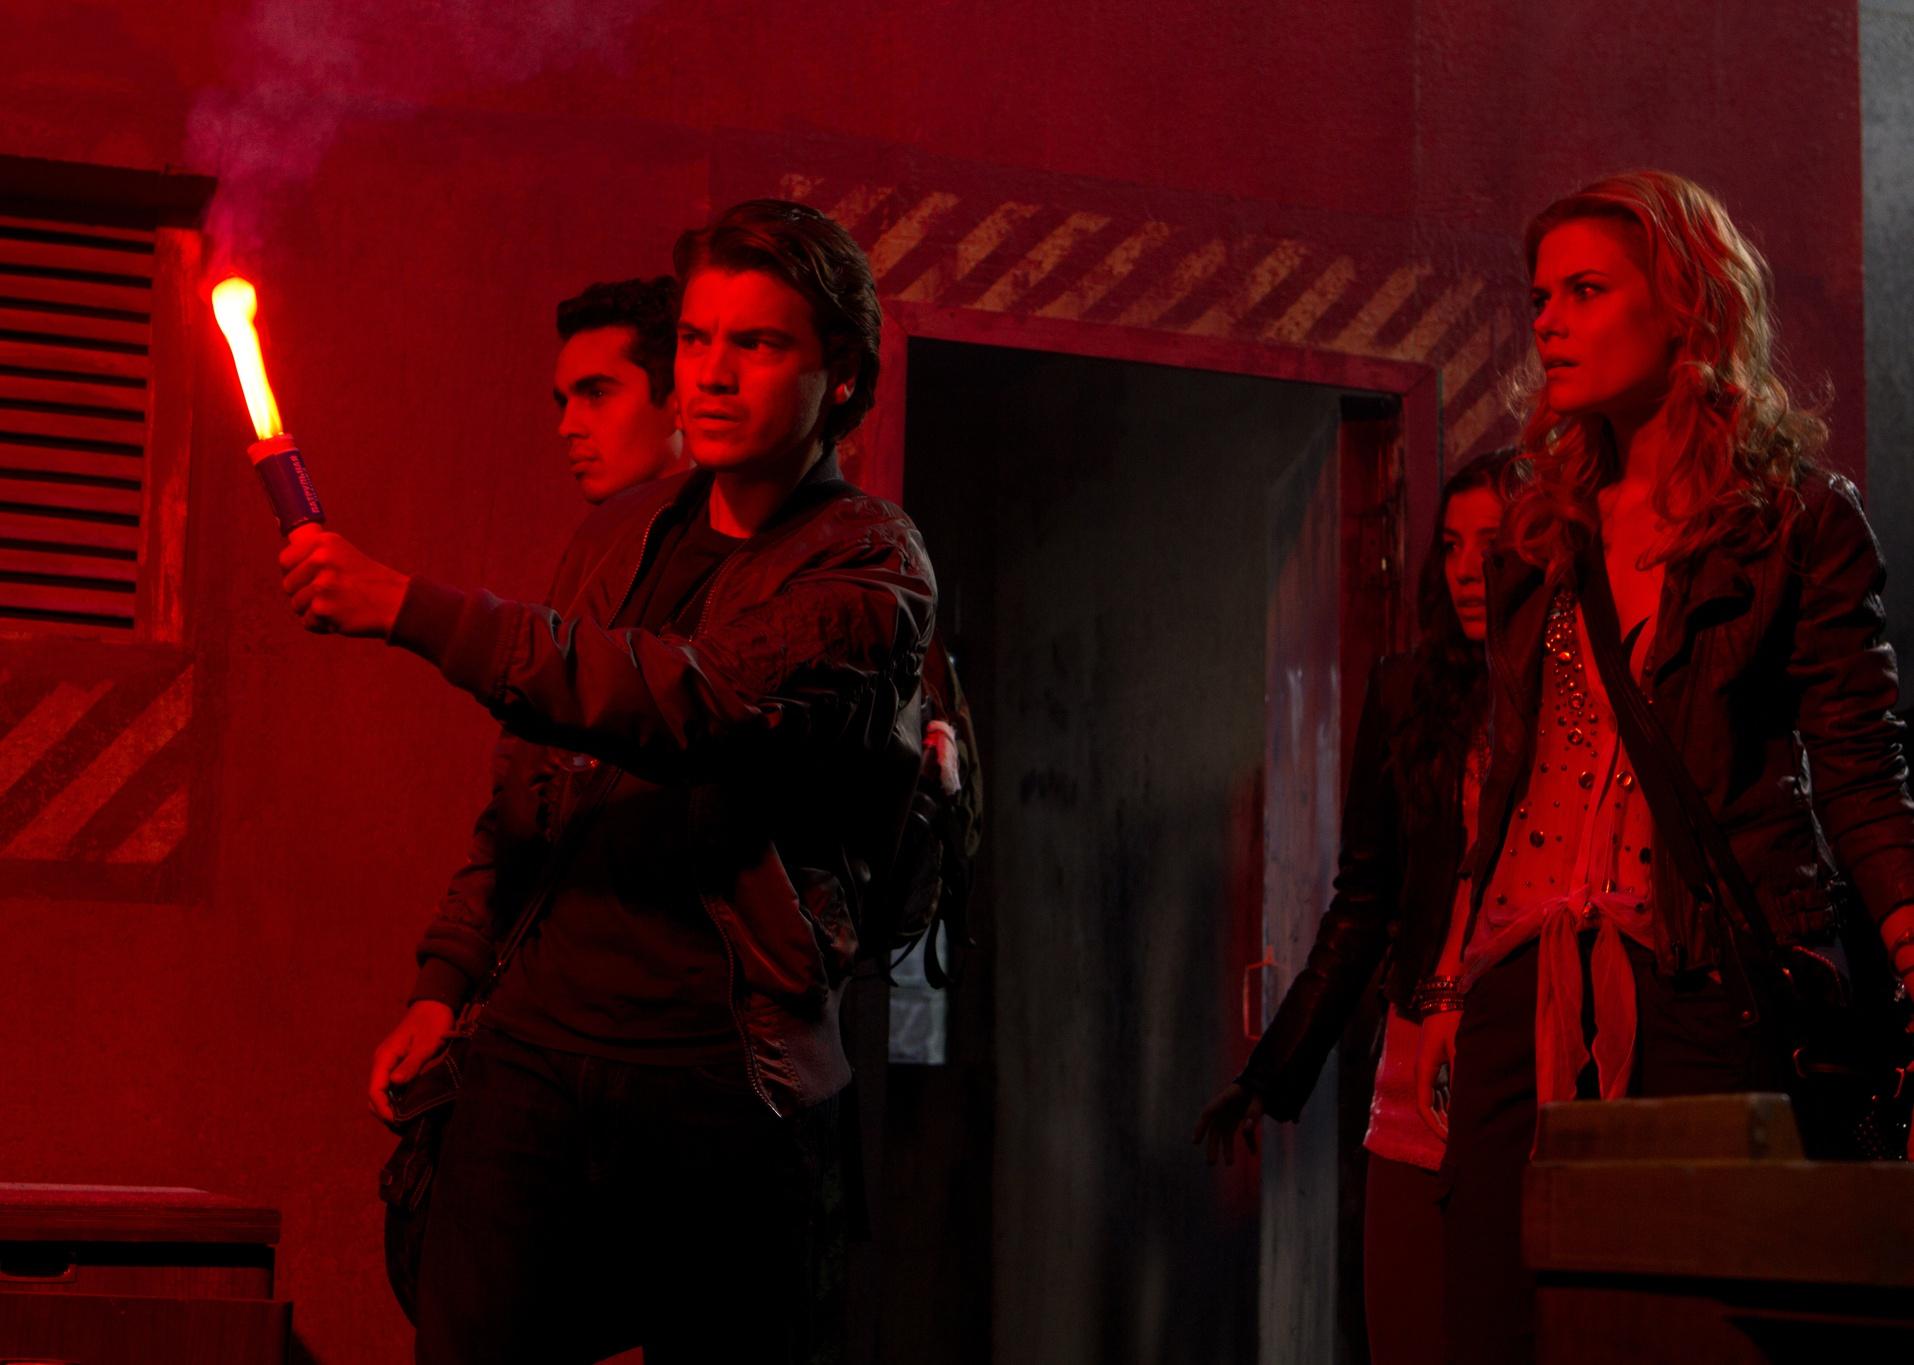 Four young adults walk through a red lit hallway.